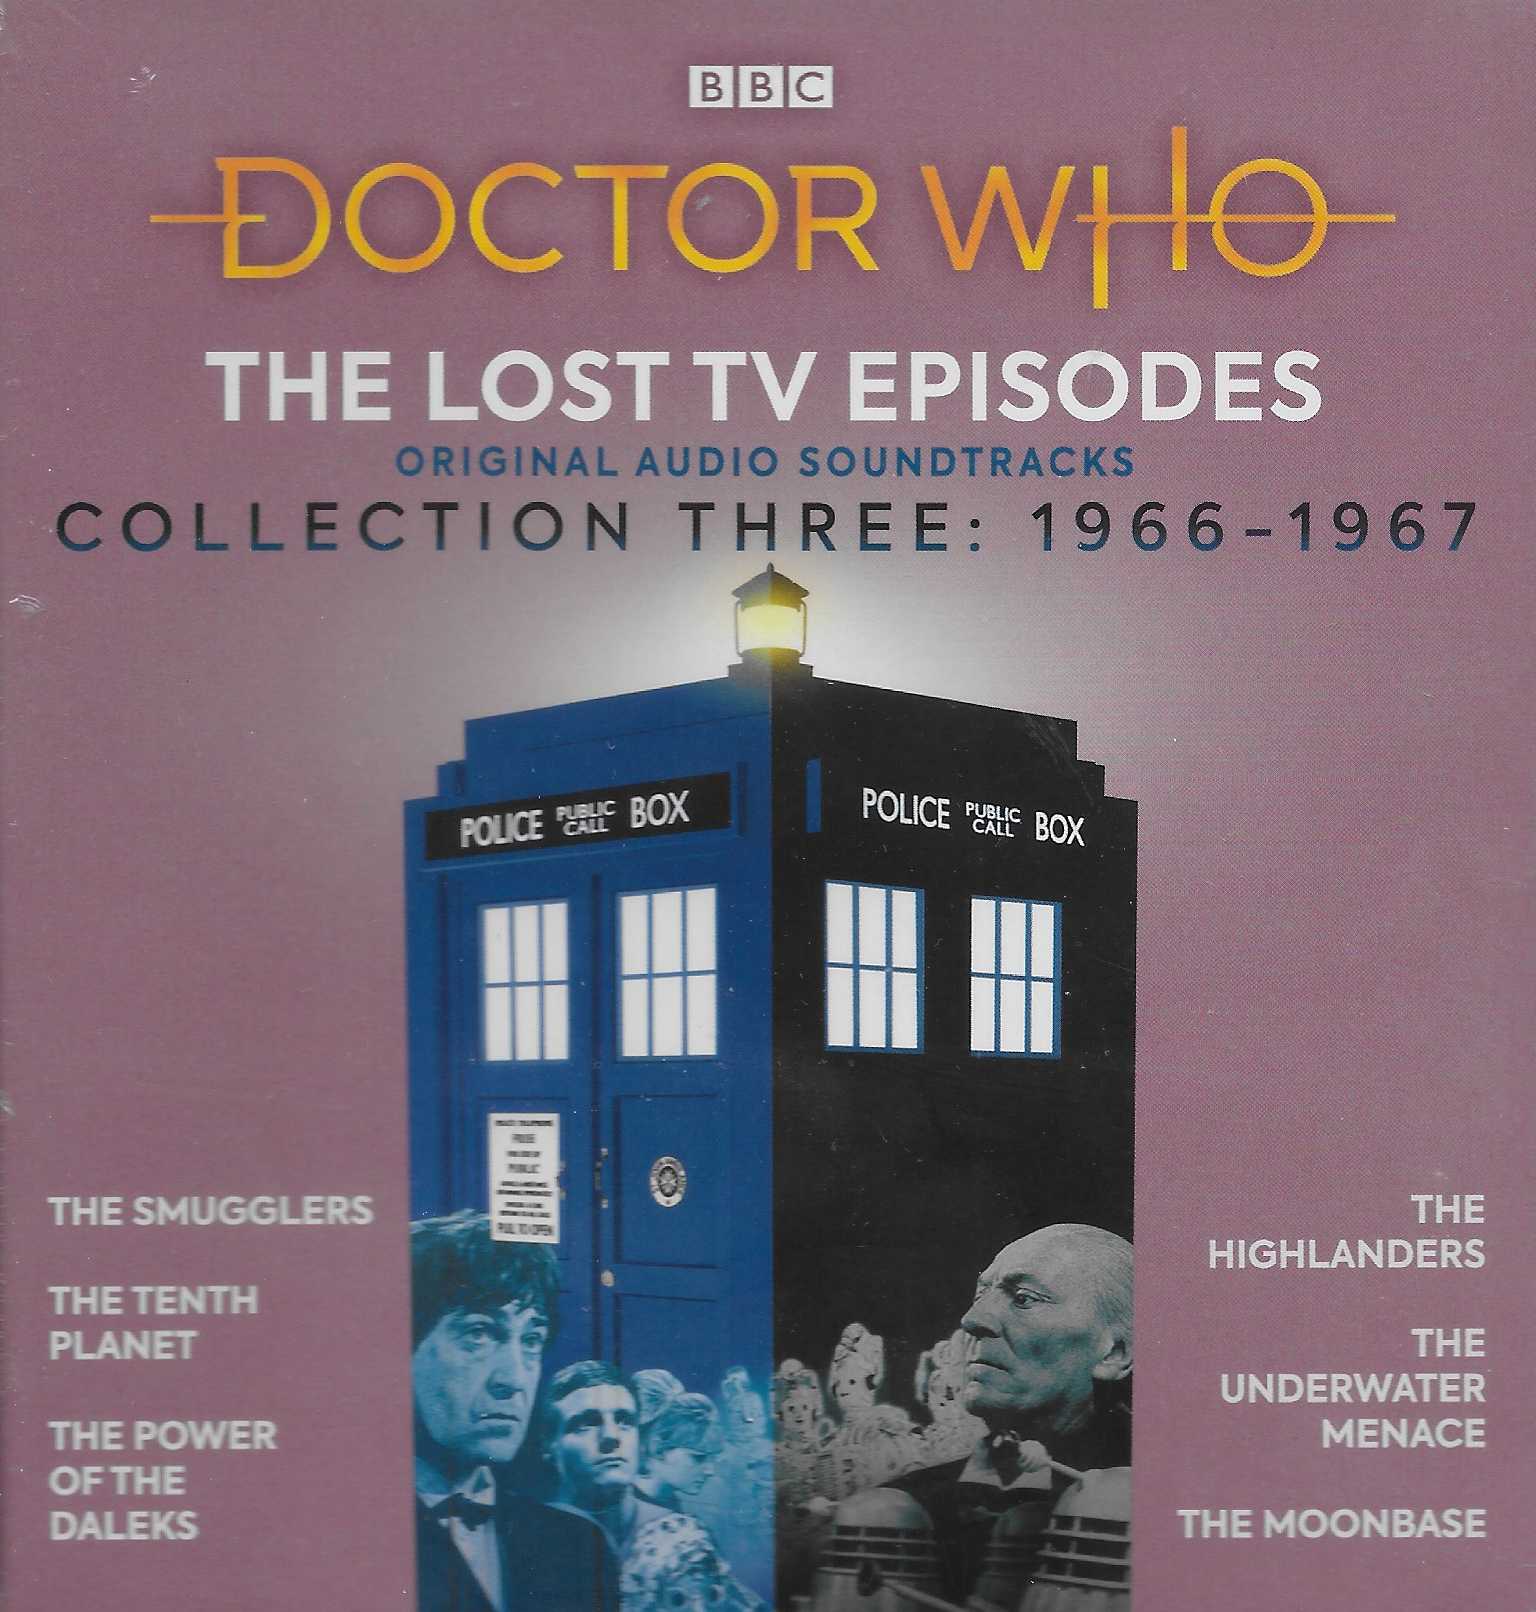 Picture of ISBN 978-1-78753-986-0 Doctor Who - The lost TV episodes - Collection three: 1966-1967 by artist Various from the BBC cds - Records and Tapes library